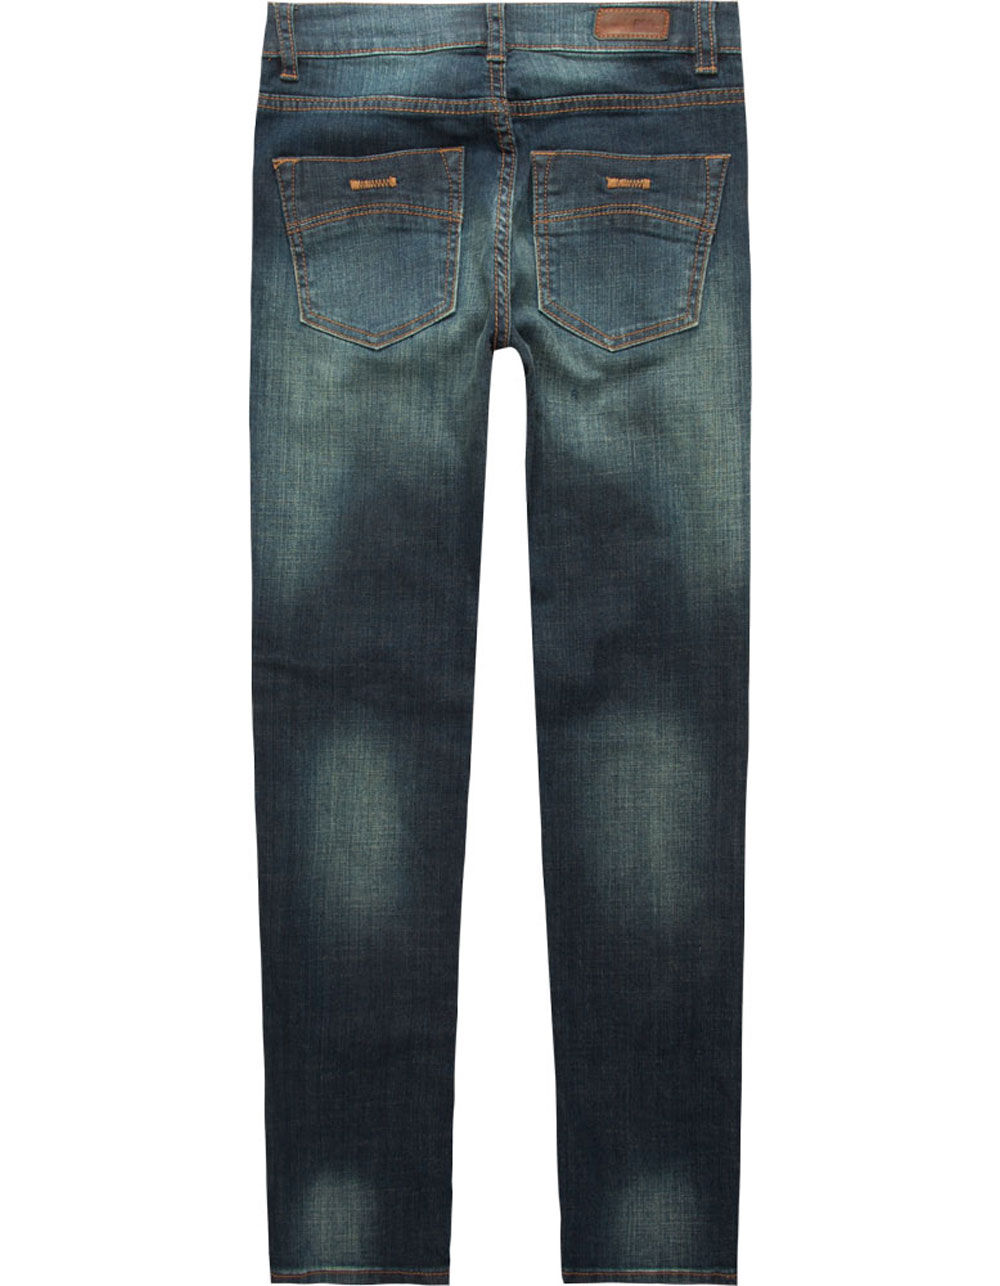 RSQ London Boys Skinny Jeans image number 4